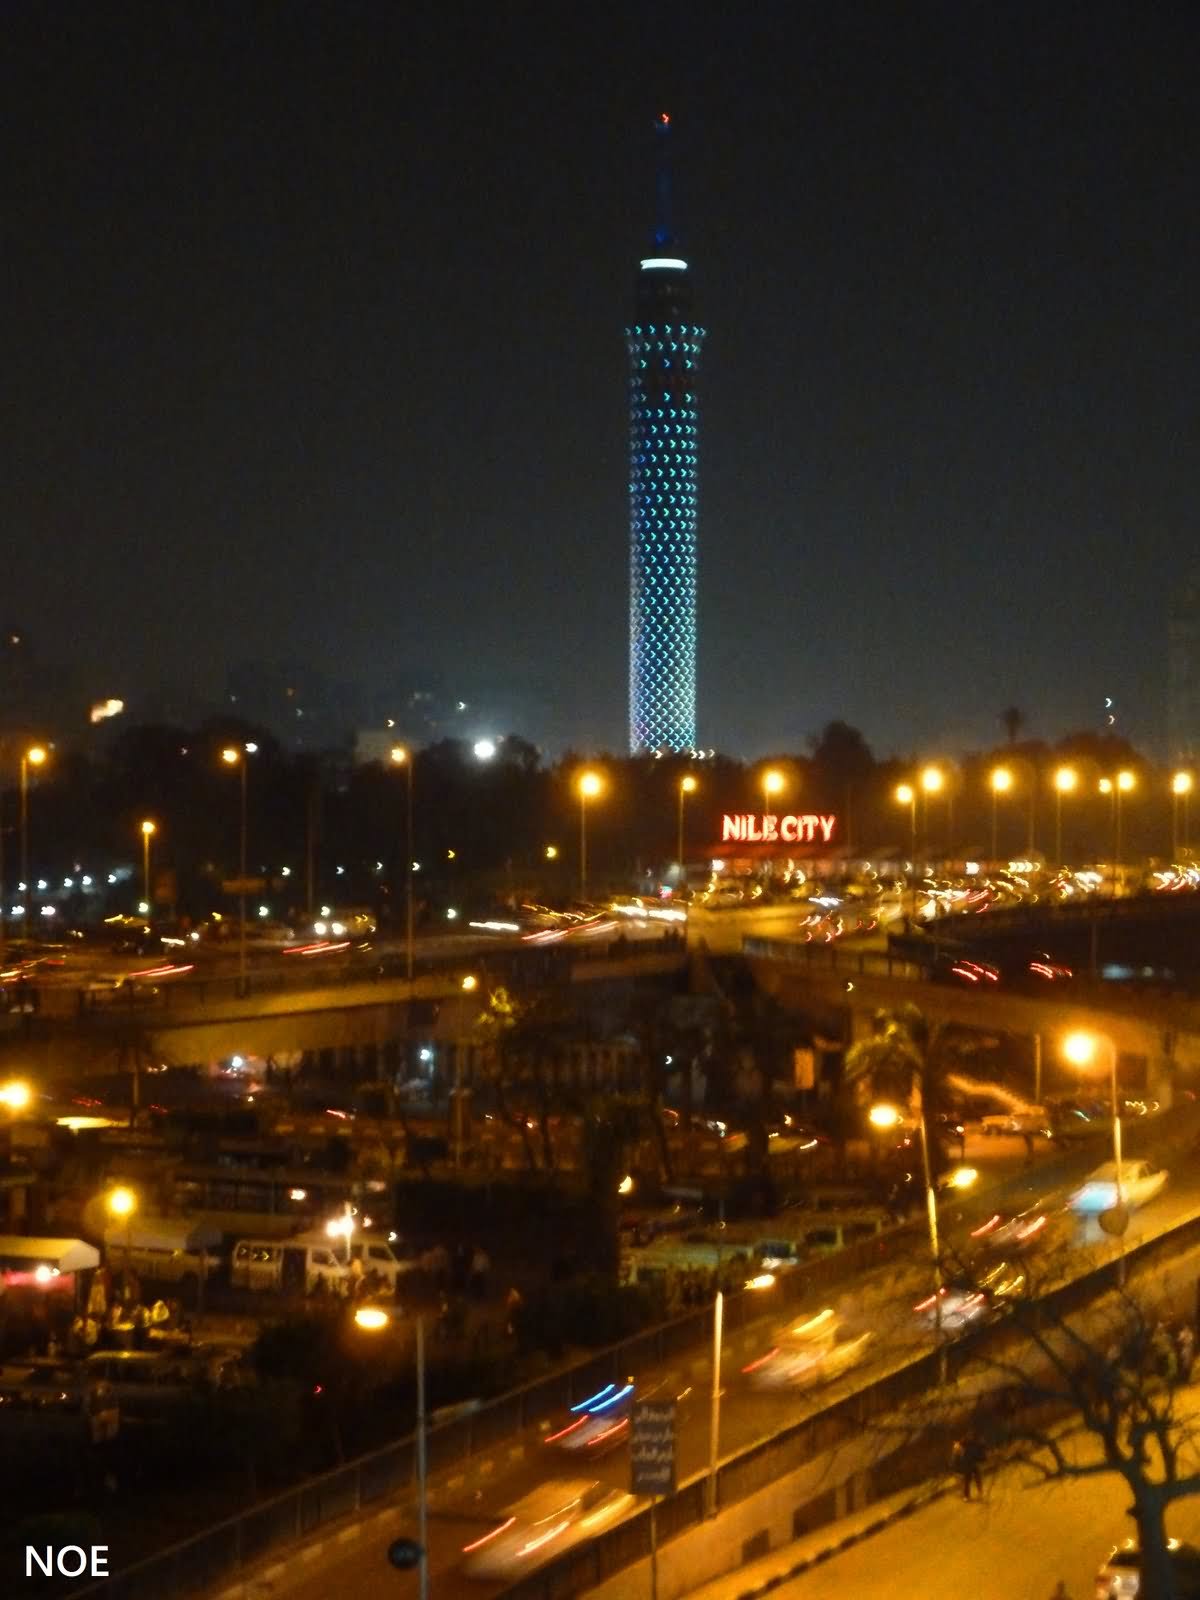 The Cairo Tower Night Picture